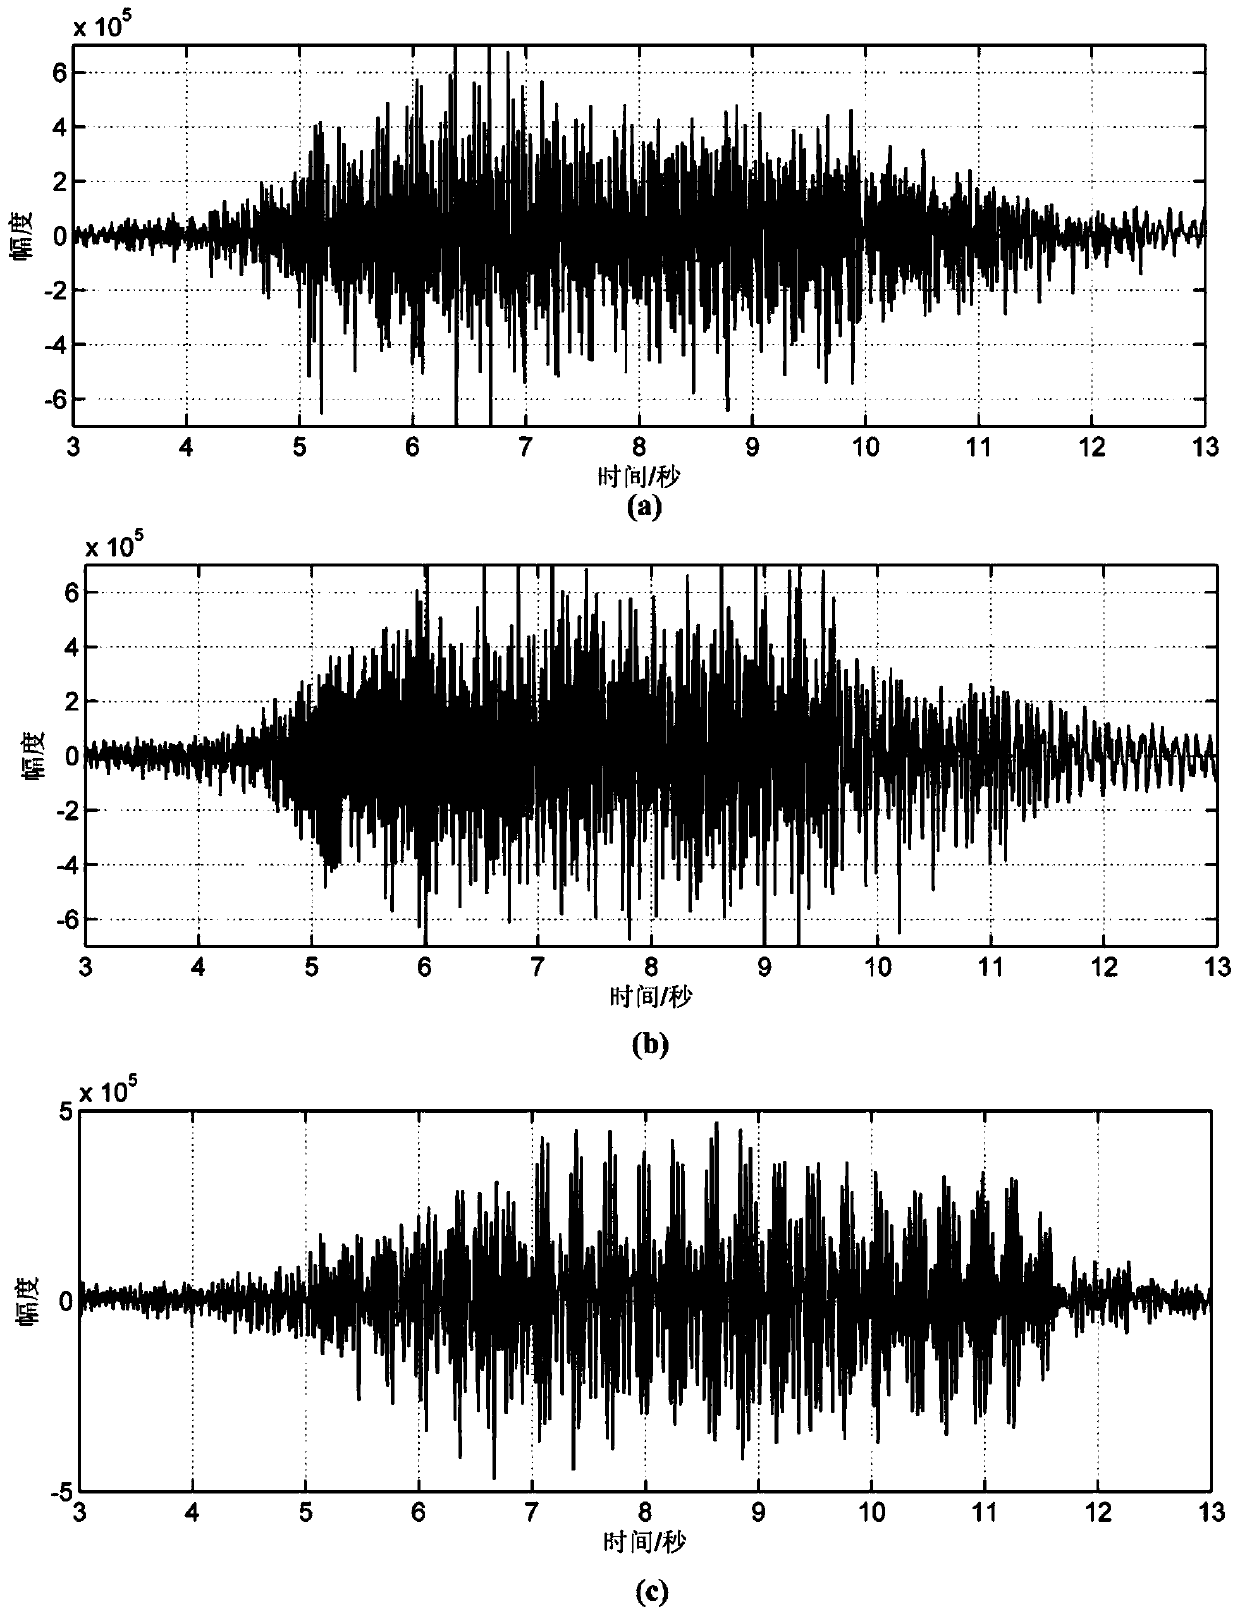 Wideband background noise suppression method for high-speed train seismic source seismic signals